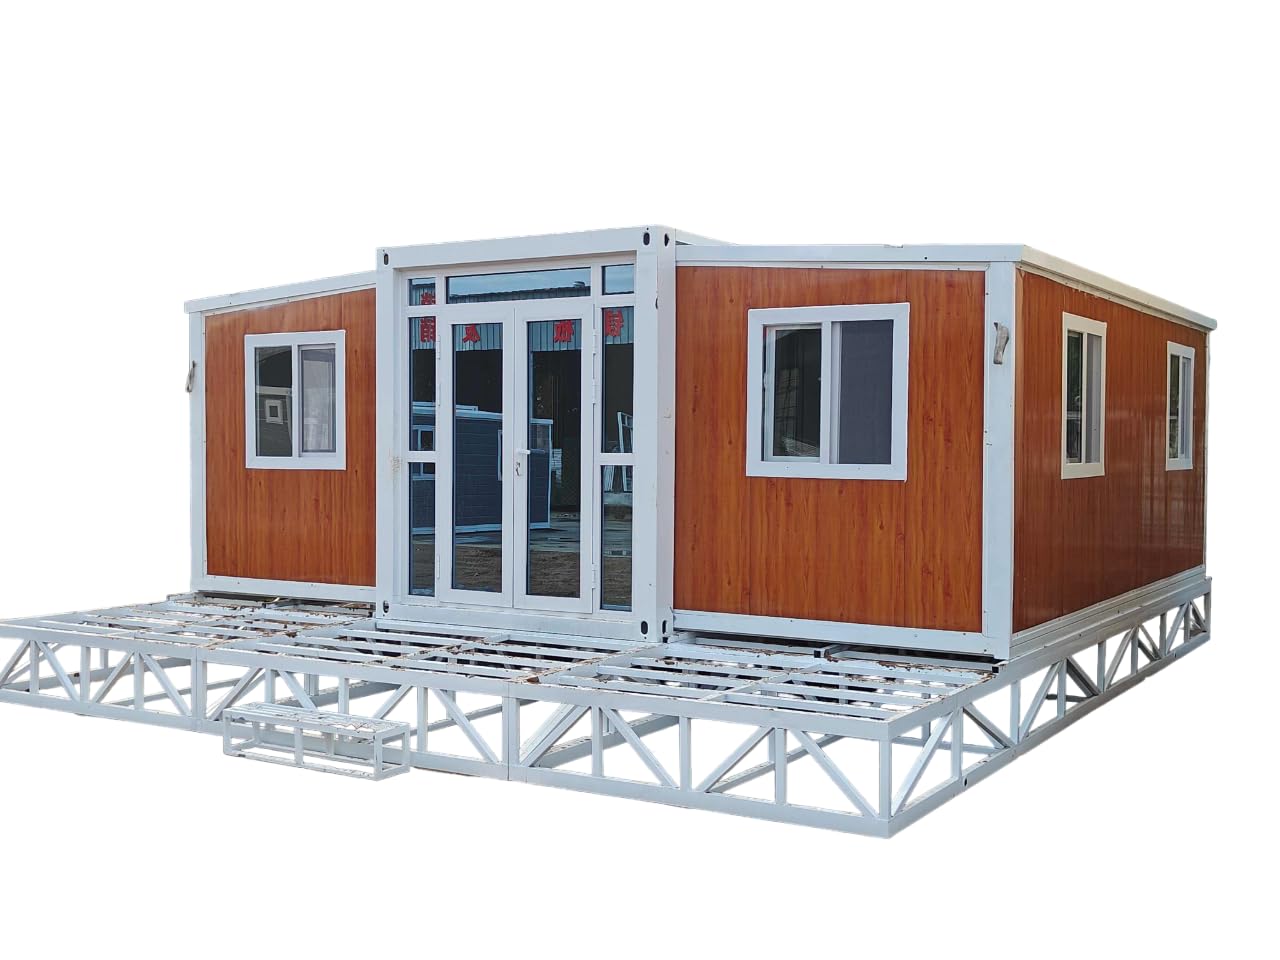 Prefab House to Live in, Casas prefabricadas para Vivir, Container House to Live in, 19ft x 20ft 2 Bed 1 Bath 1Kitchen (Fixtures Included), Tiny House with Electrical and Plumbing, Man cave